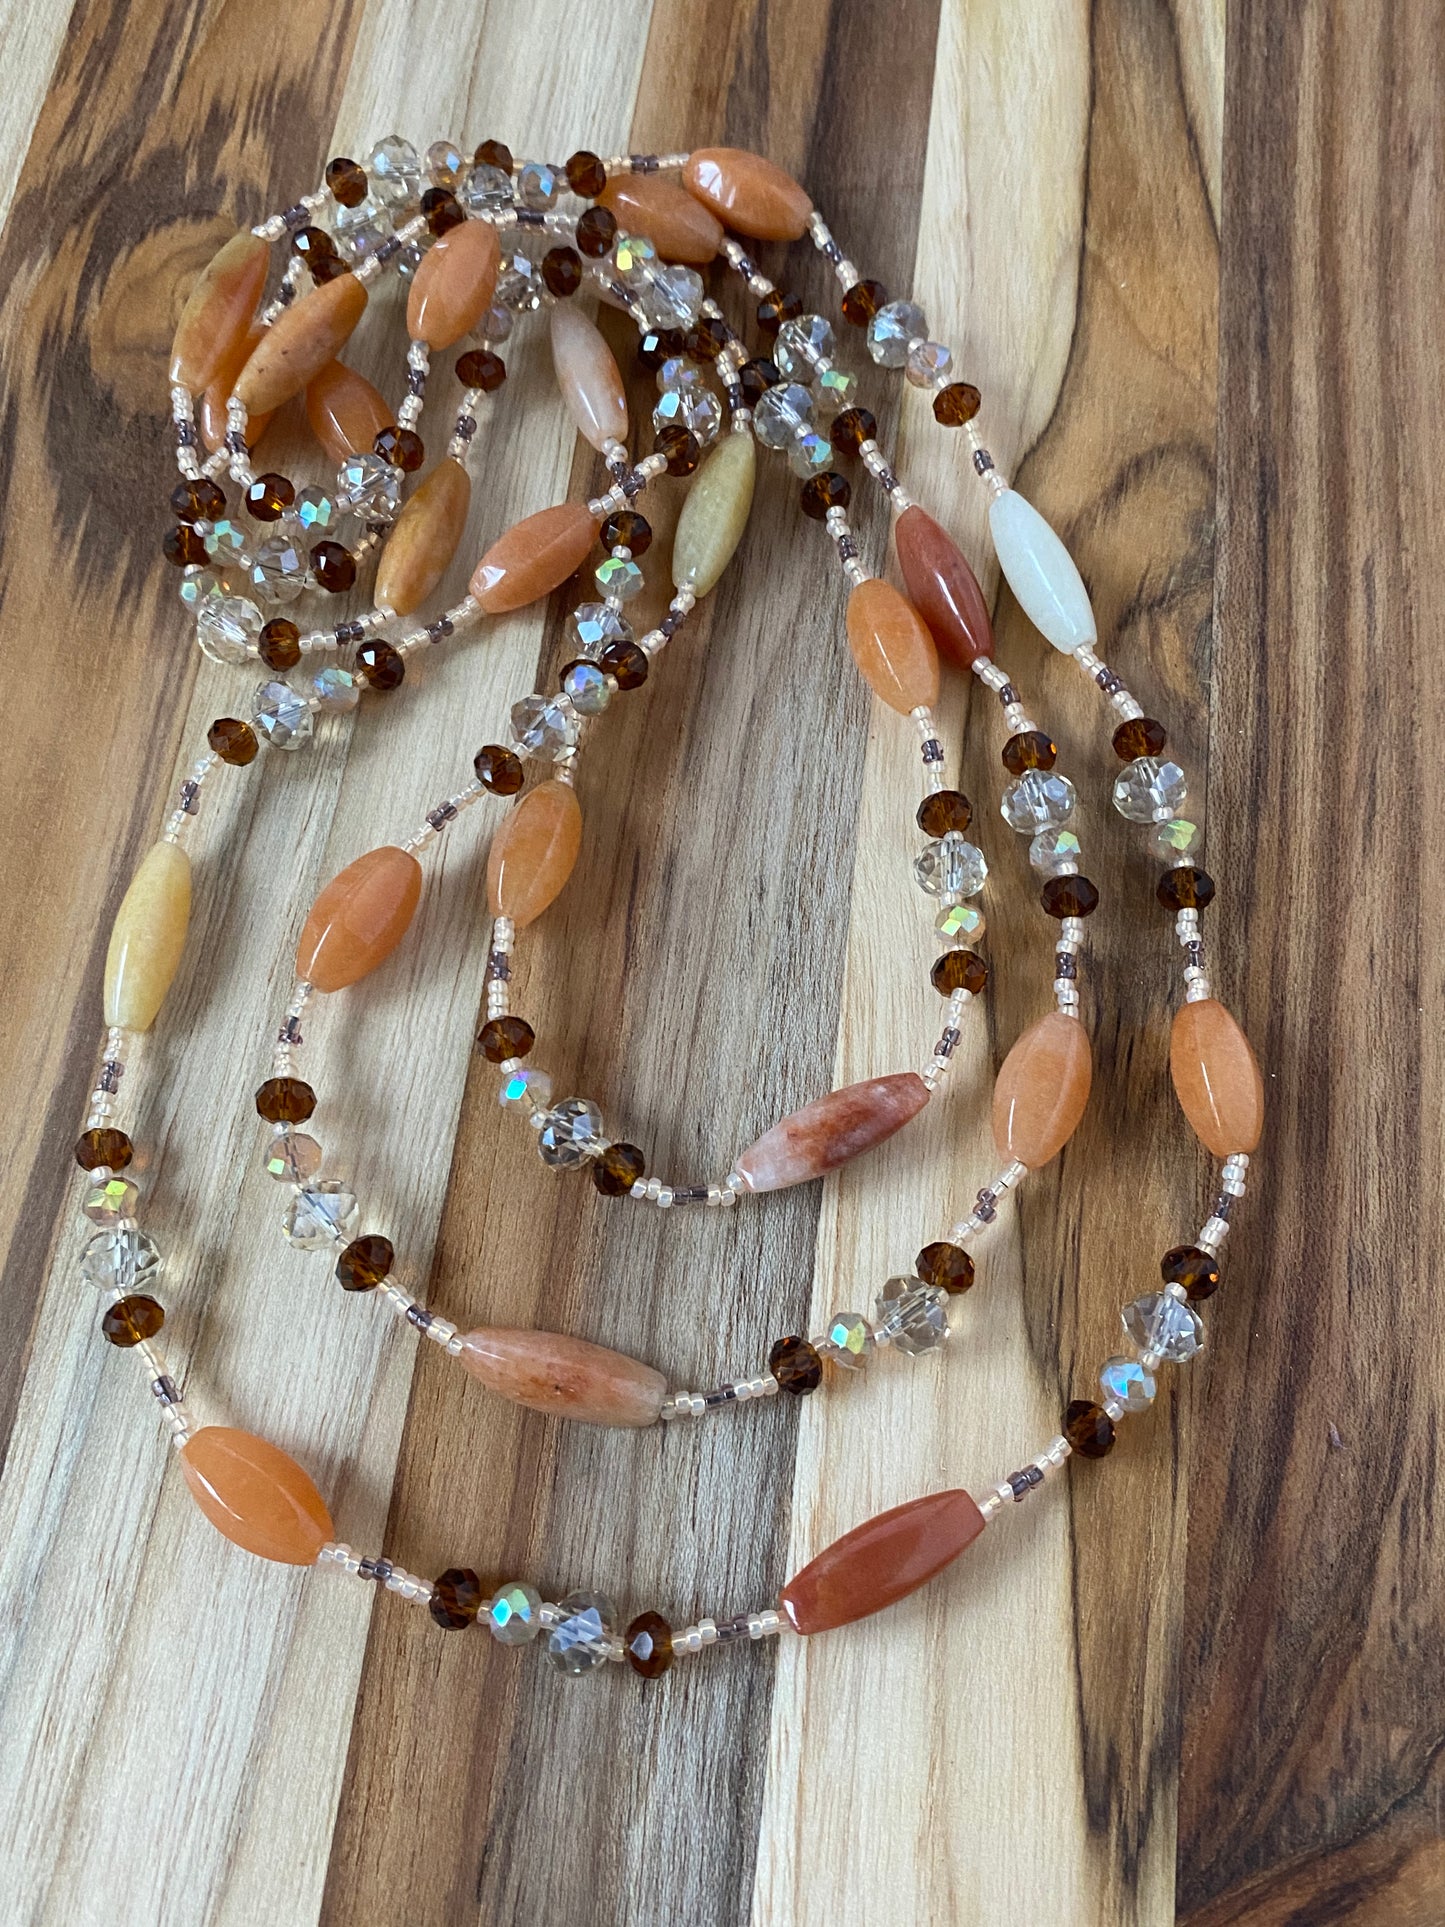 60" Extra Long Agate Beaded Necklace with Brown & Champagne Crystal Beads